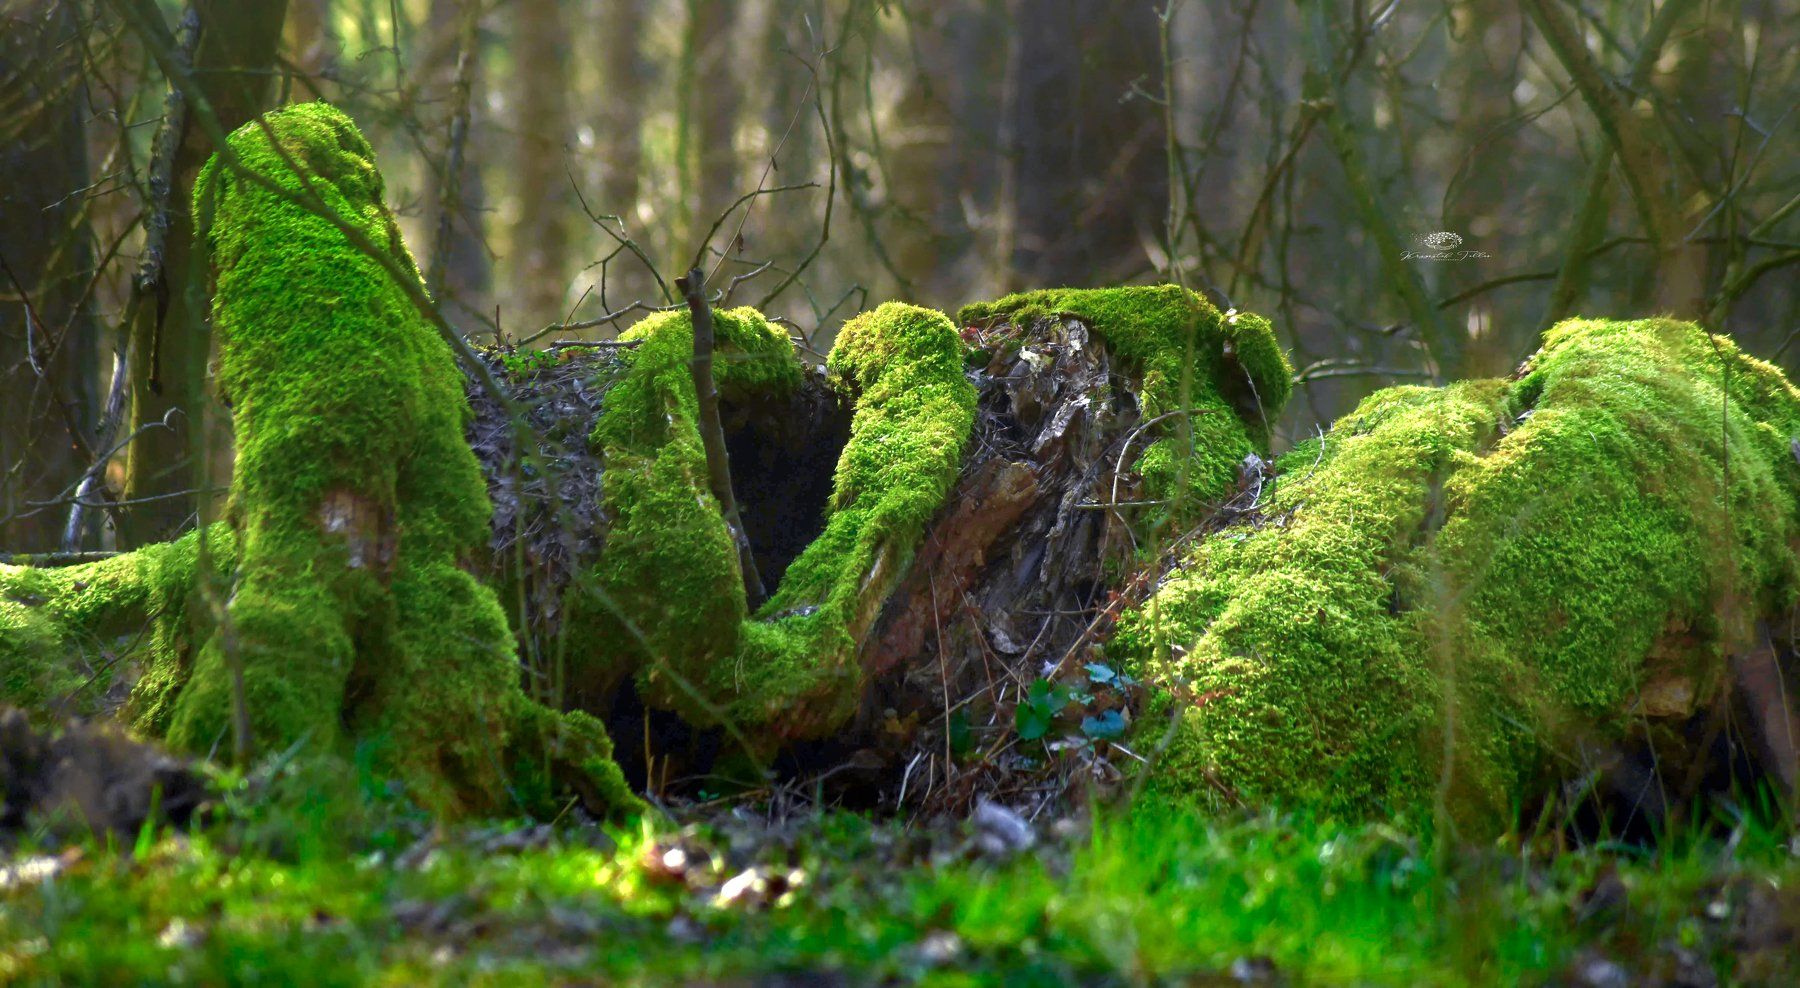 Act, Nature, Morning, forest, Tree, Light, Nikon, Moss, , Krzysztof Tollas